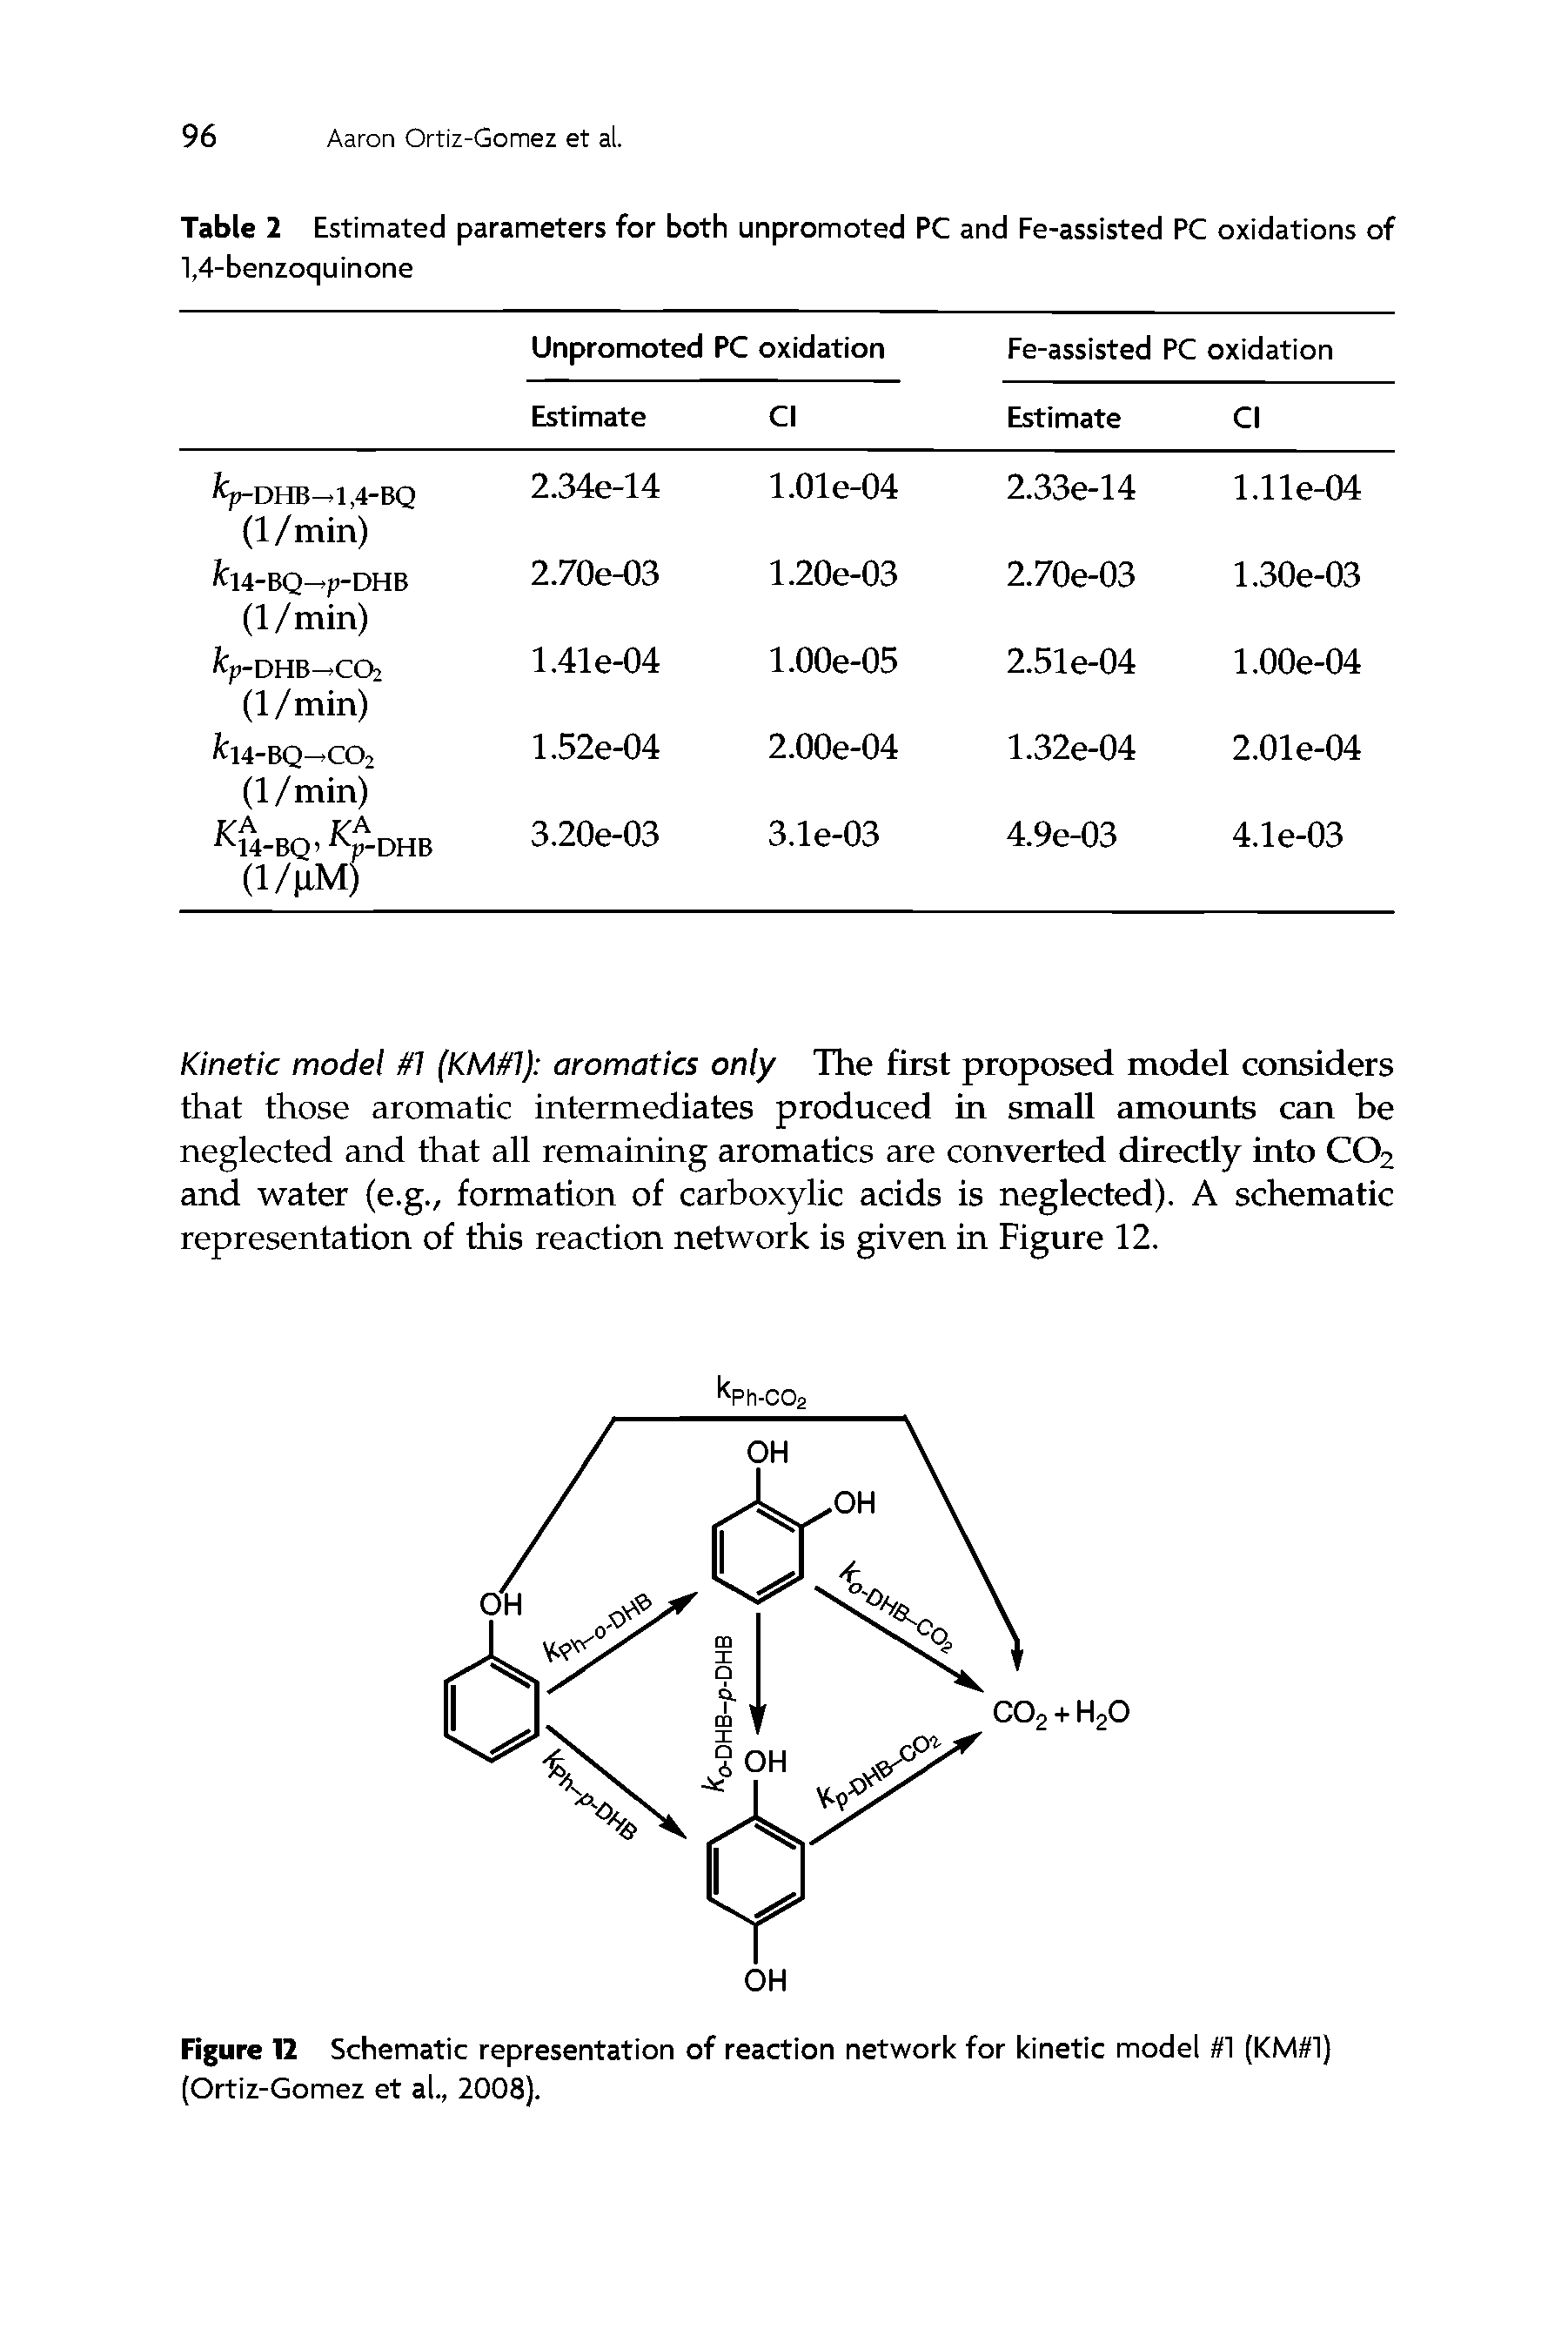 Table 2 Estimated parameters for both unpromoted PC and Fe-assisted PC oxidations of 1,4-benzoquinone...